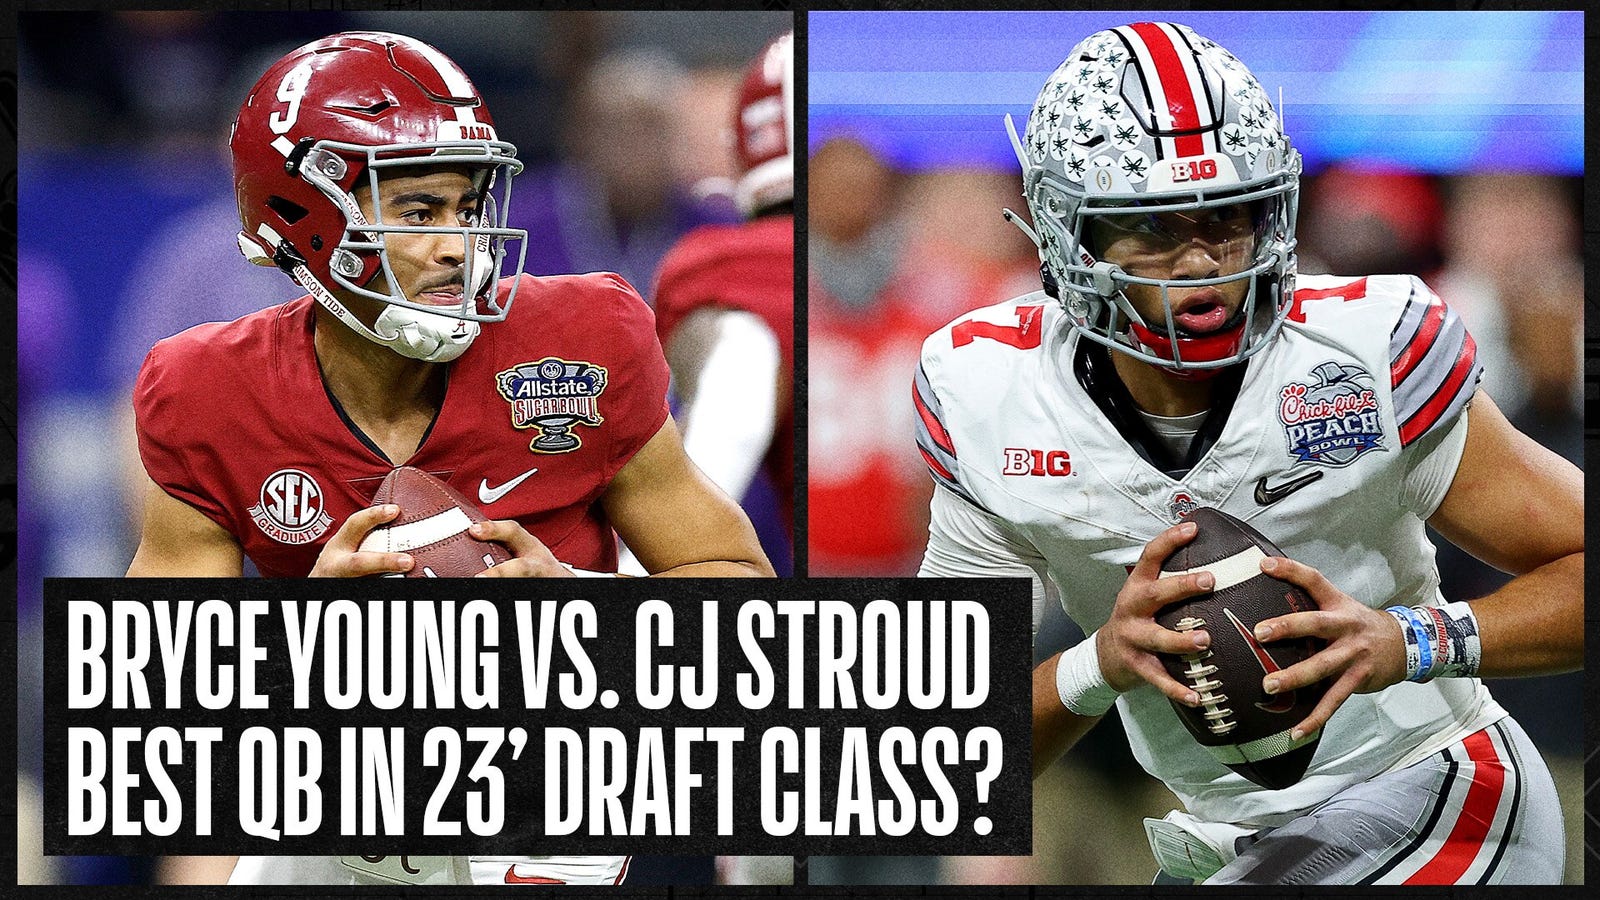 Bryce Young vs C.J. Stroud: Who is the best QB in the NFL Draft?